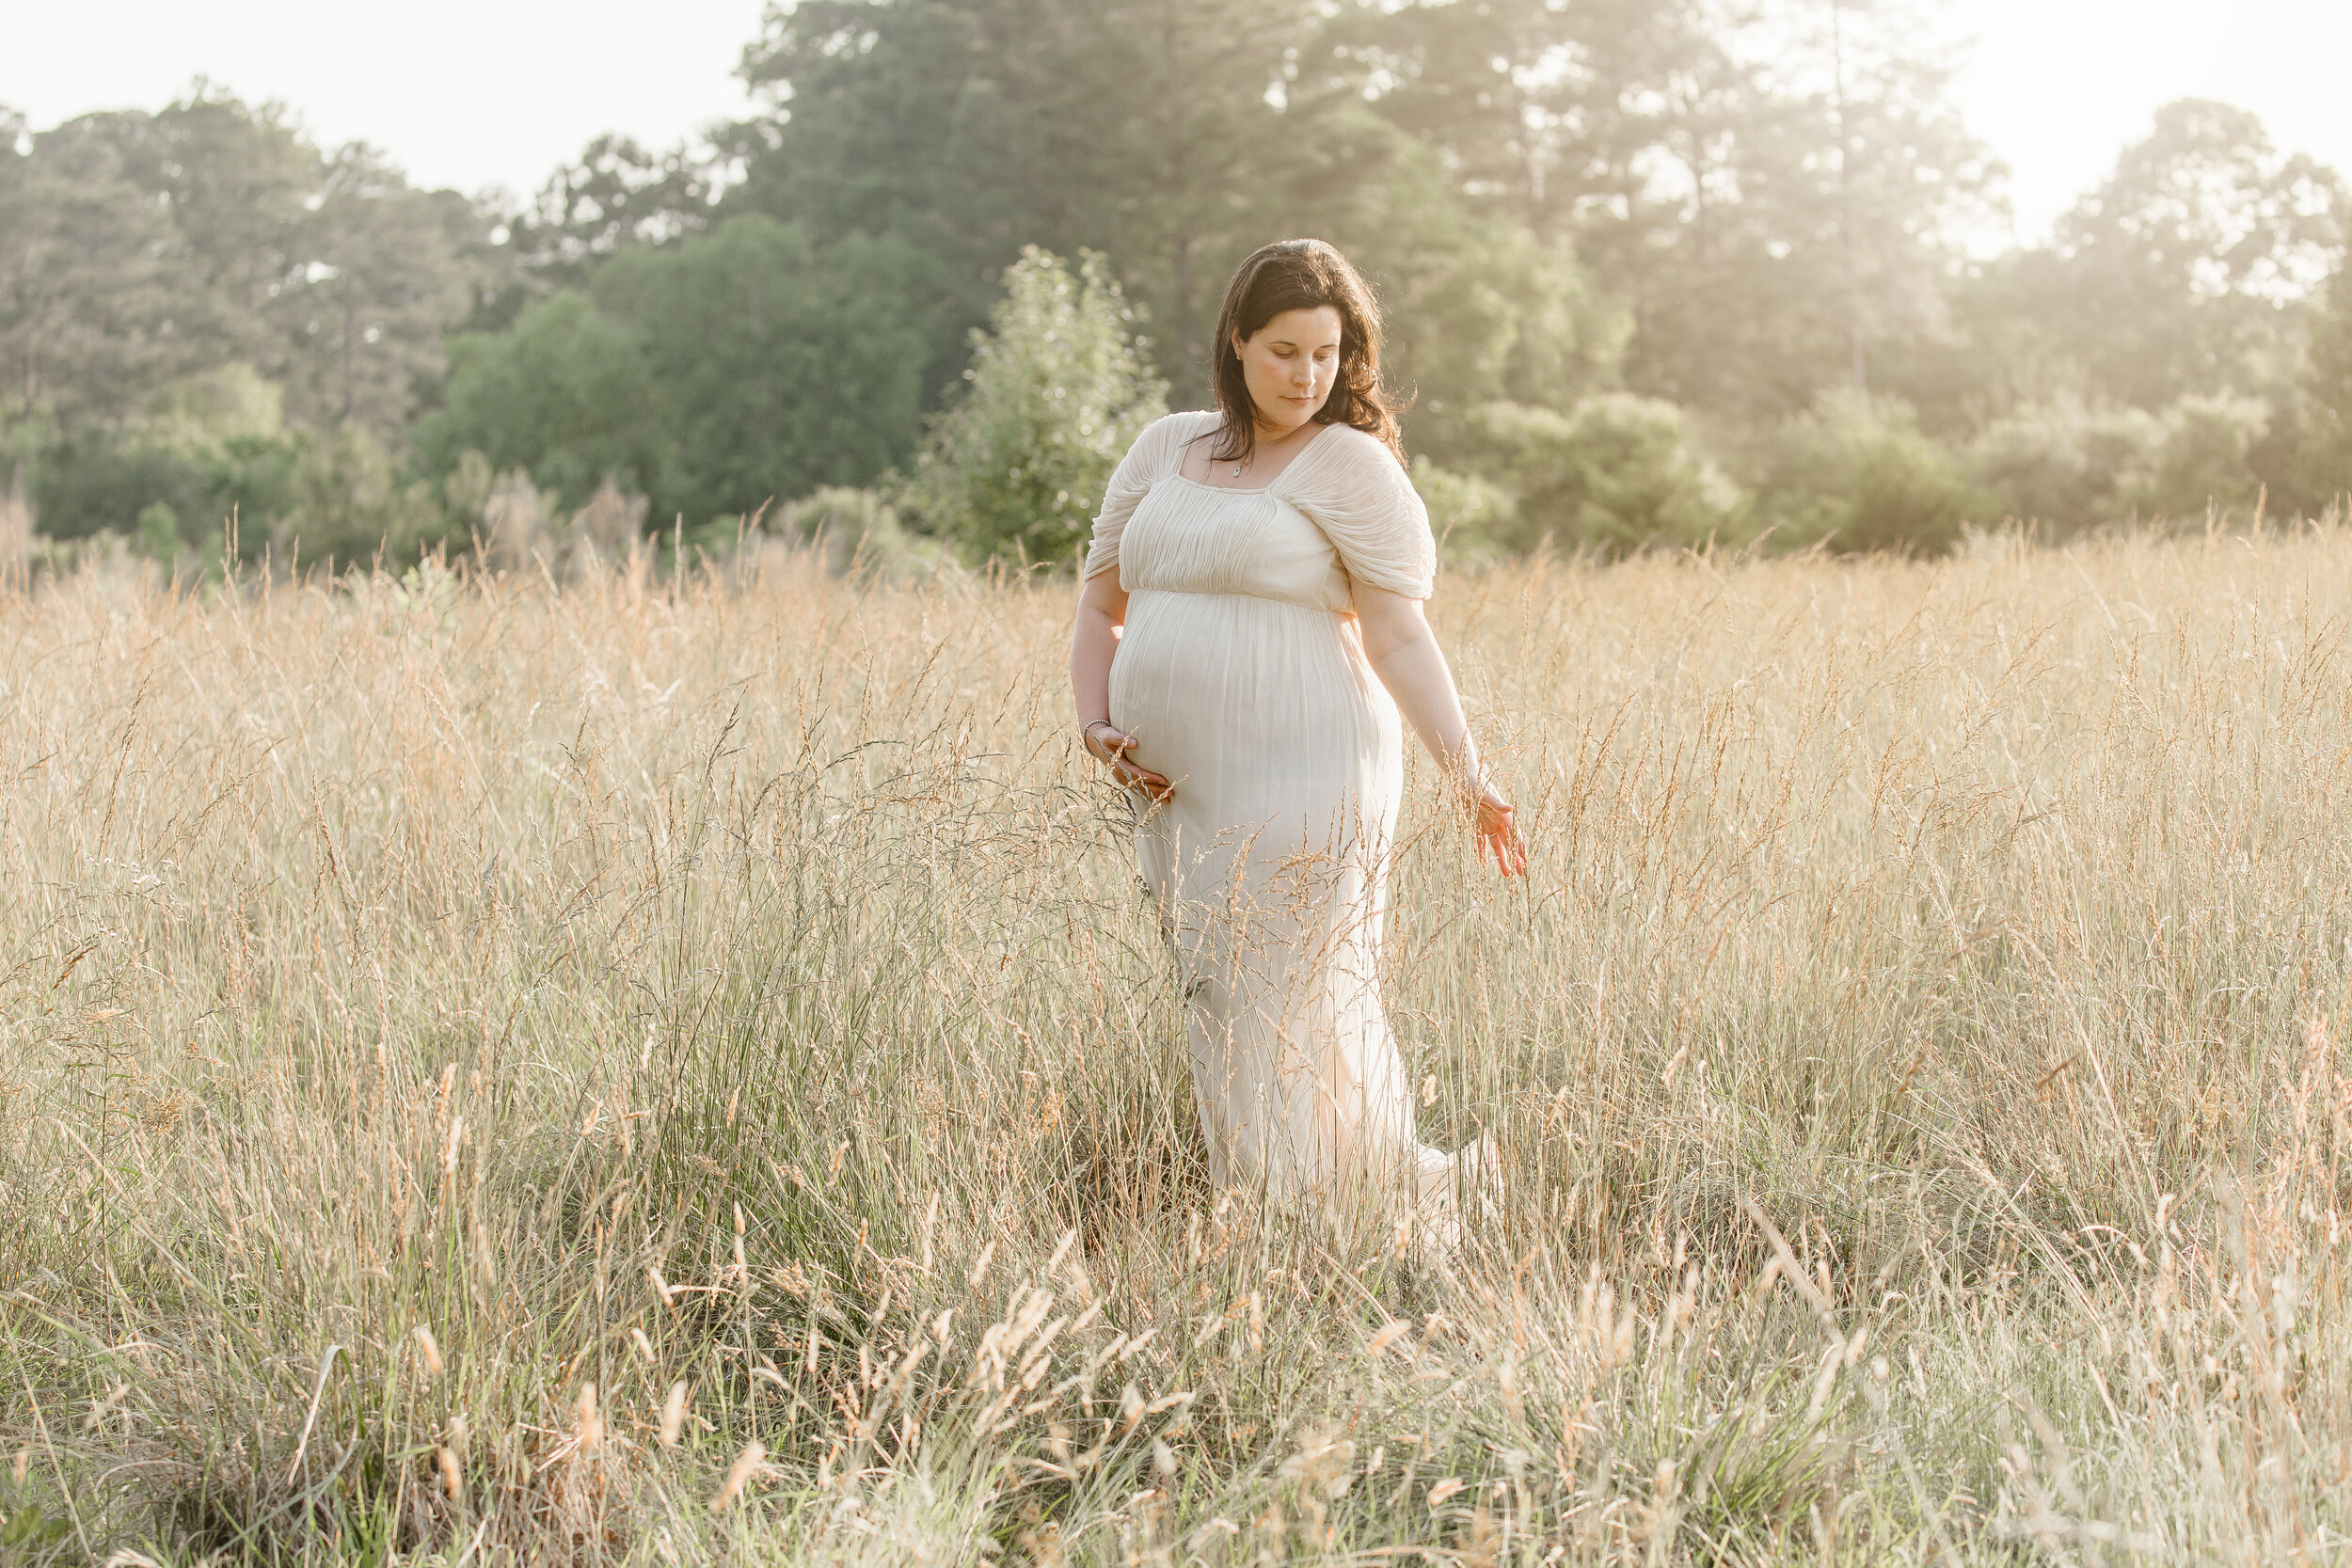 Outdoor Raleigh Maternity Session Raleigh maternity photographer (11).jpg